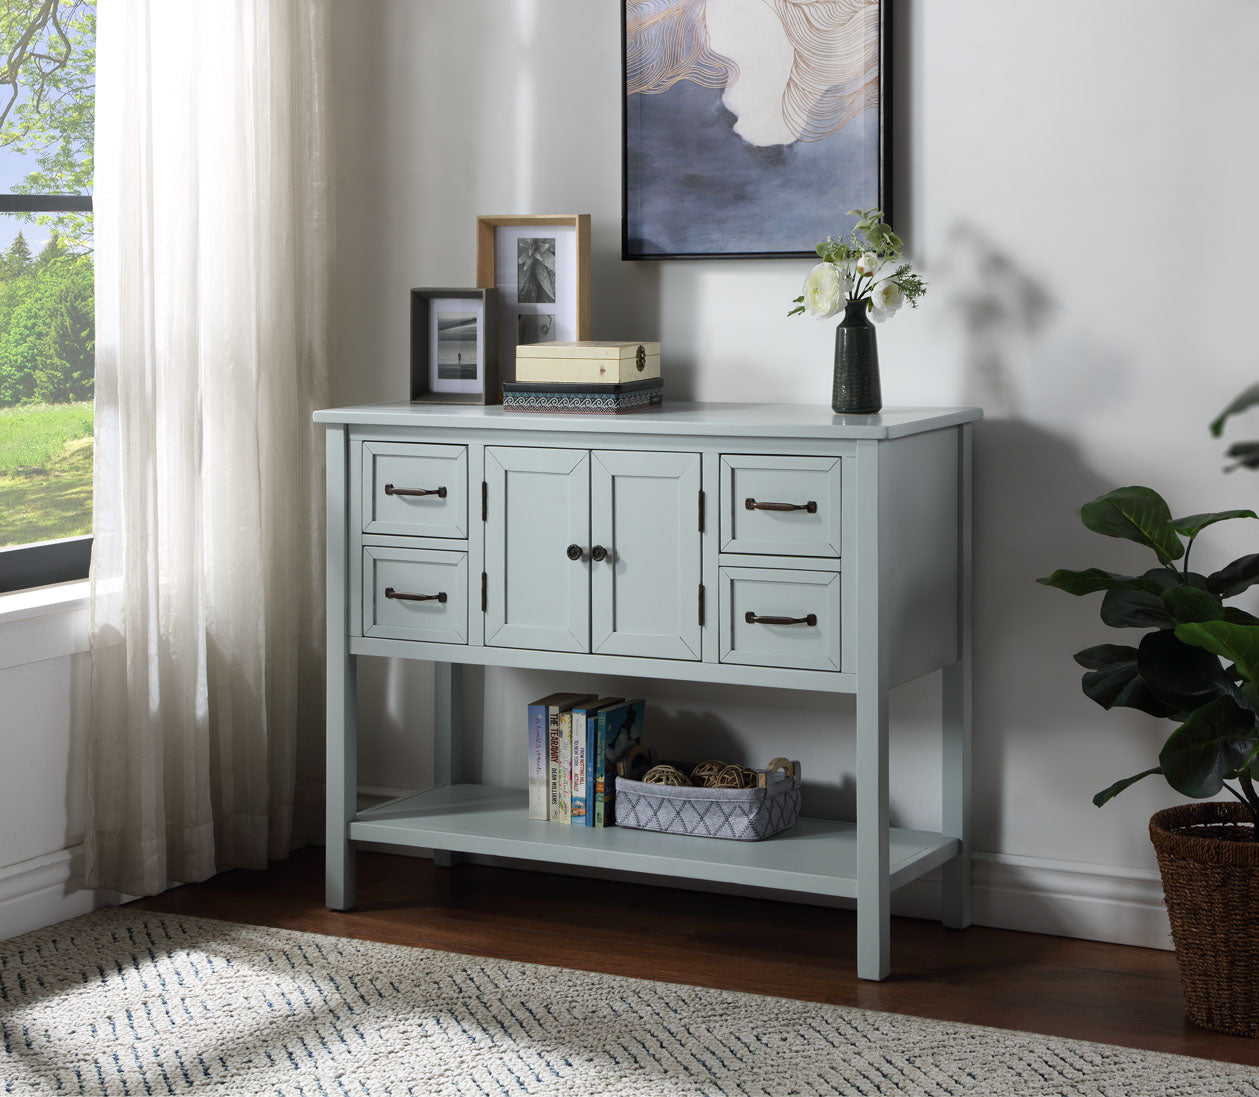 Light Blue Modern Console Table with 4 Drawers, 1 Cabinet and 1 Shelf